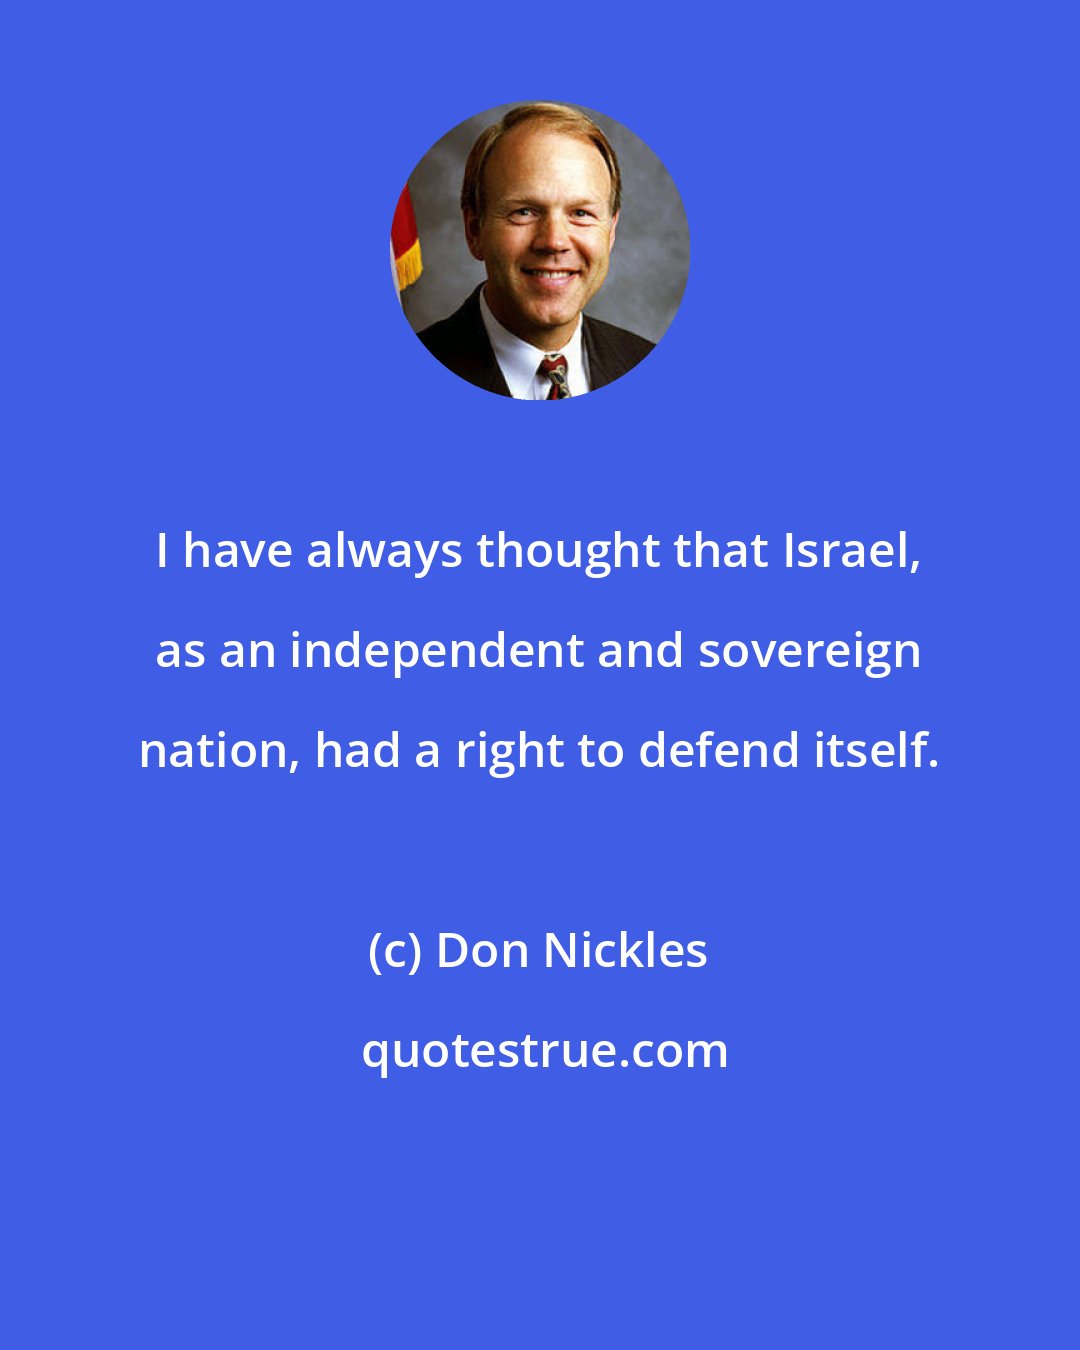 Don Nickles: I have always thought that Israel, as an independent and sovereign nation, had a right to defend itself.